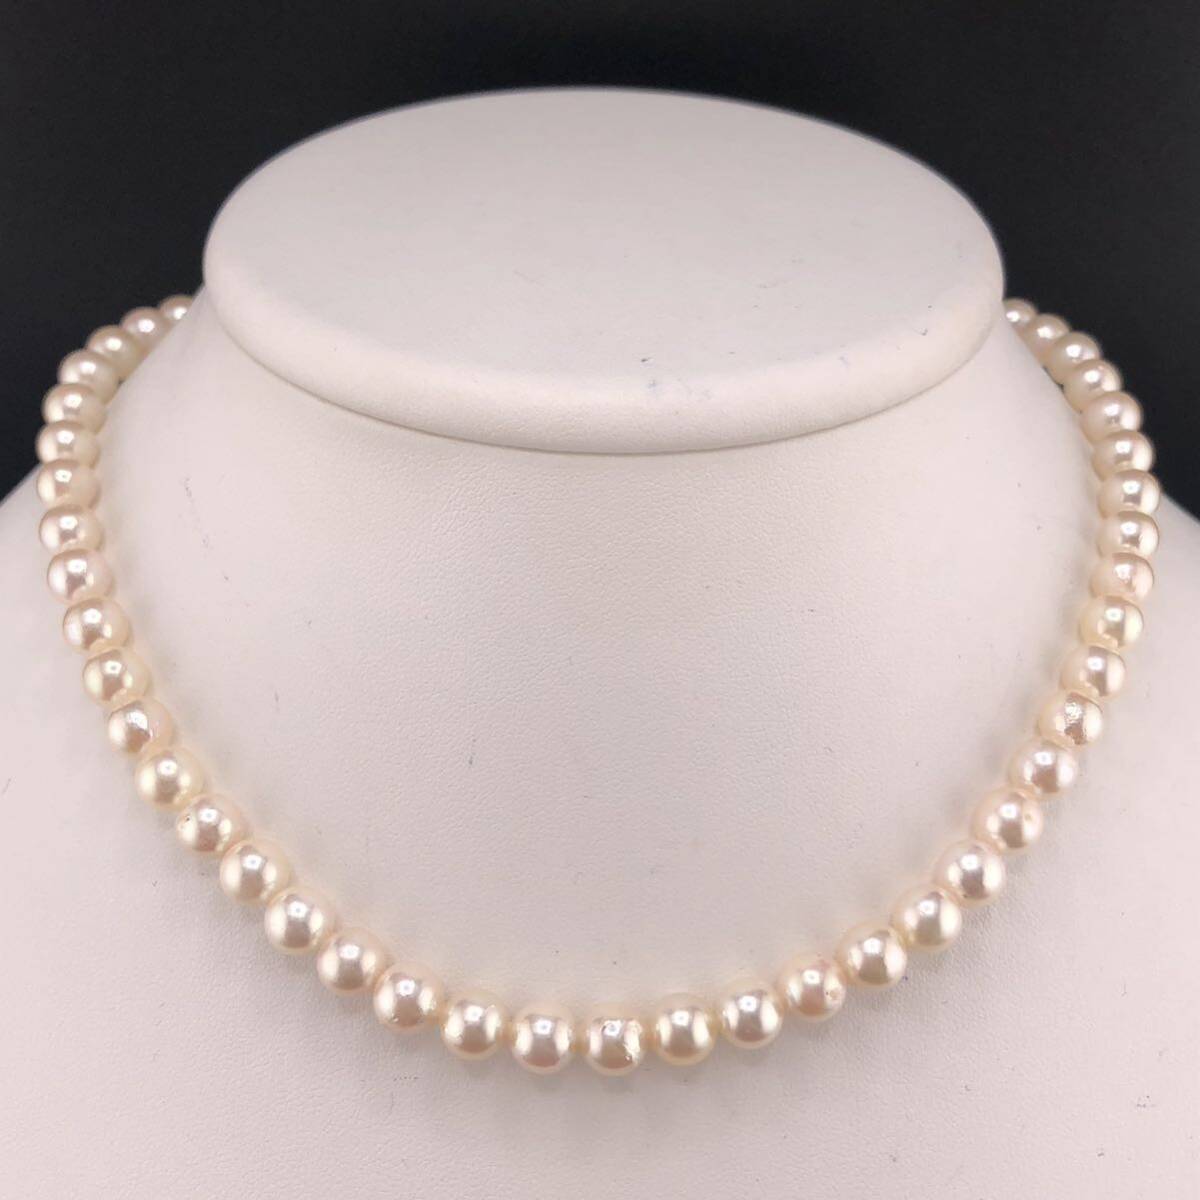 E04-5519 アコヤパールネックレス 6.5mm~7.0mm 38cm 26.5g ( アコヤ真珠 Pearl necklace SILVER )の画像1